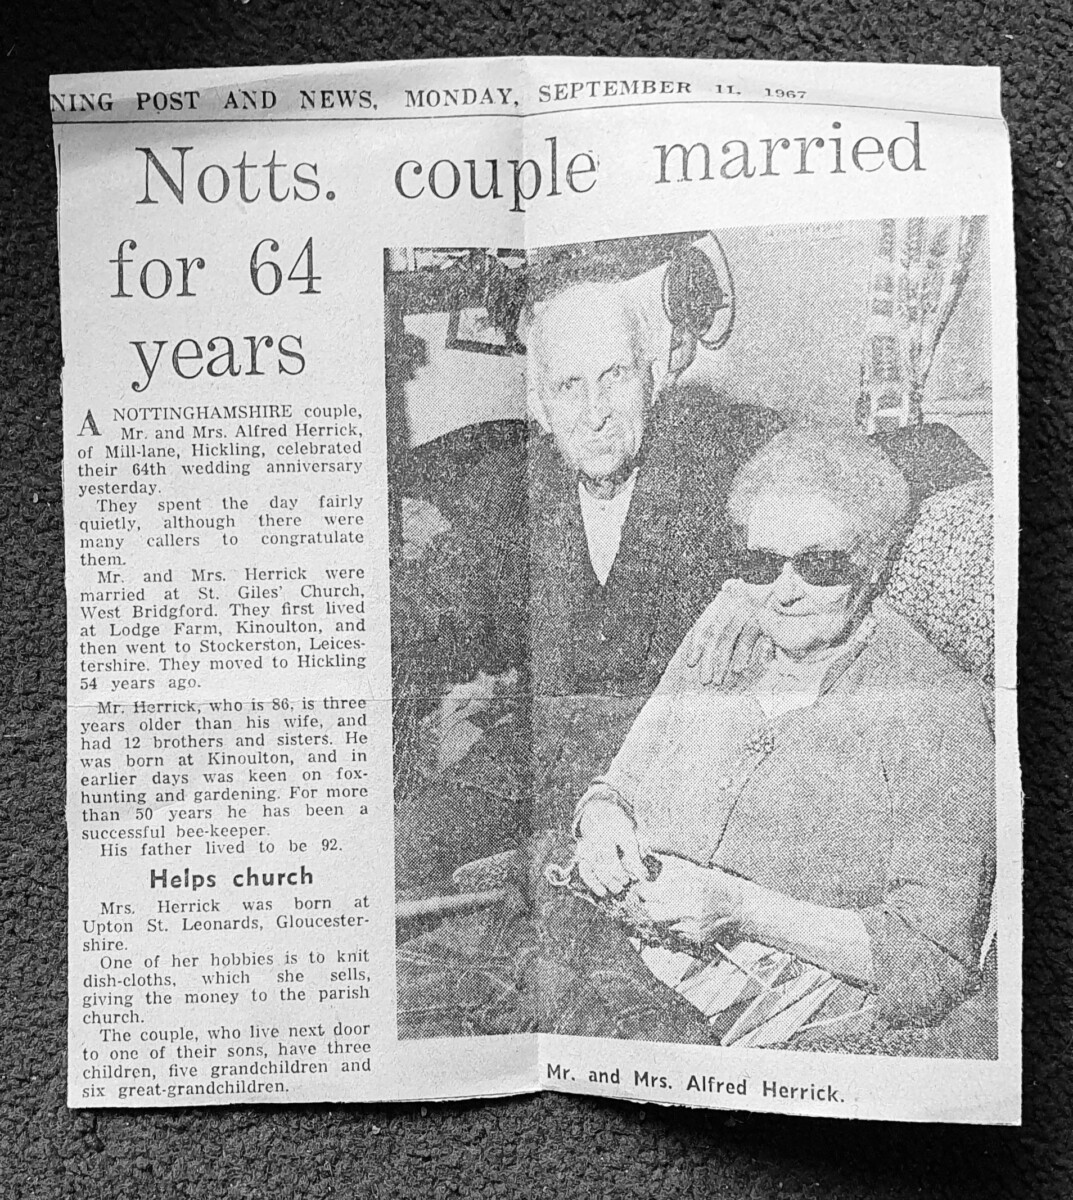 Mr & Mrs Alfred Herrick married for 64 years (Heather Maunders)